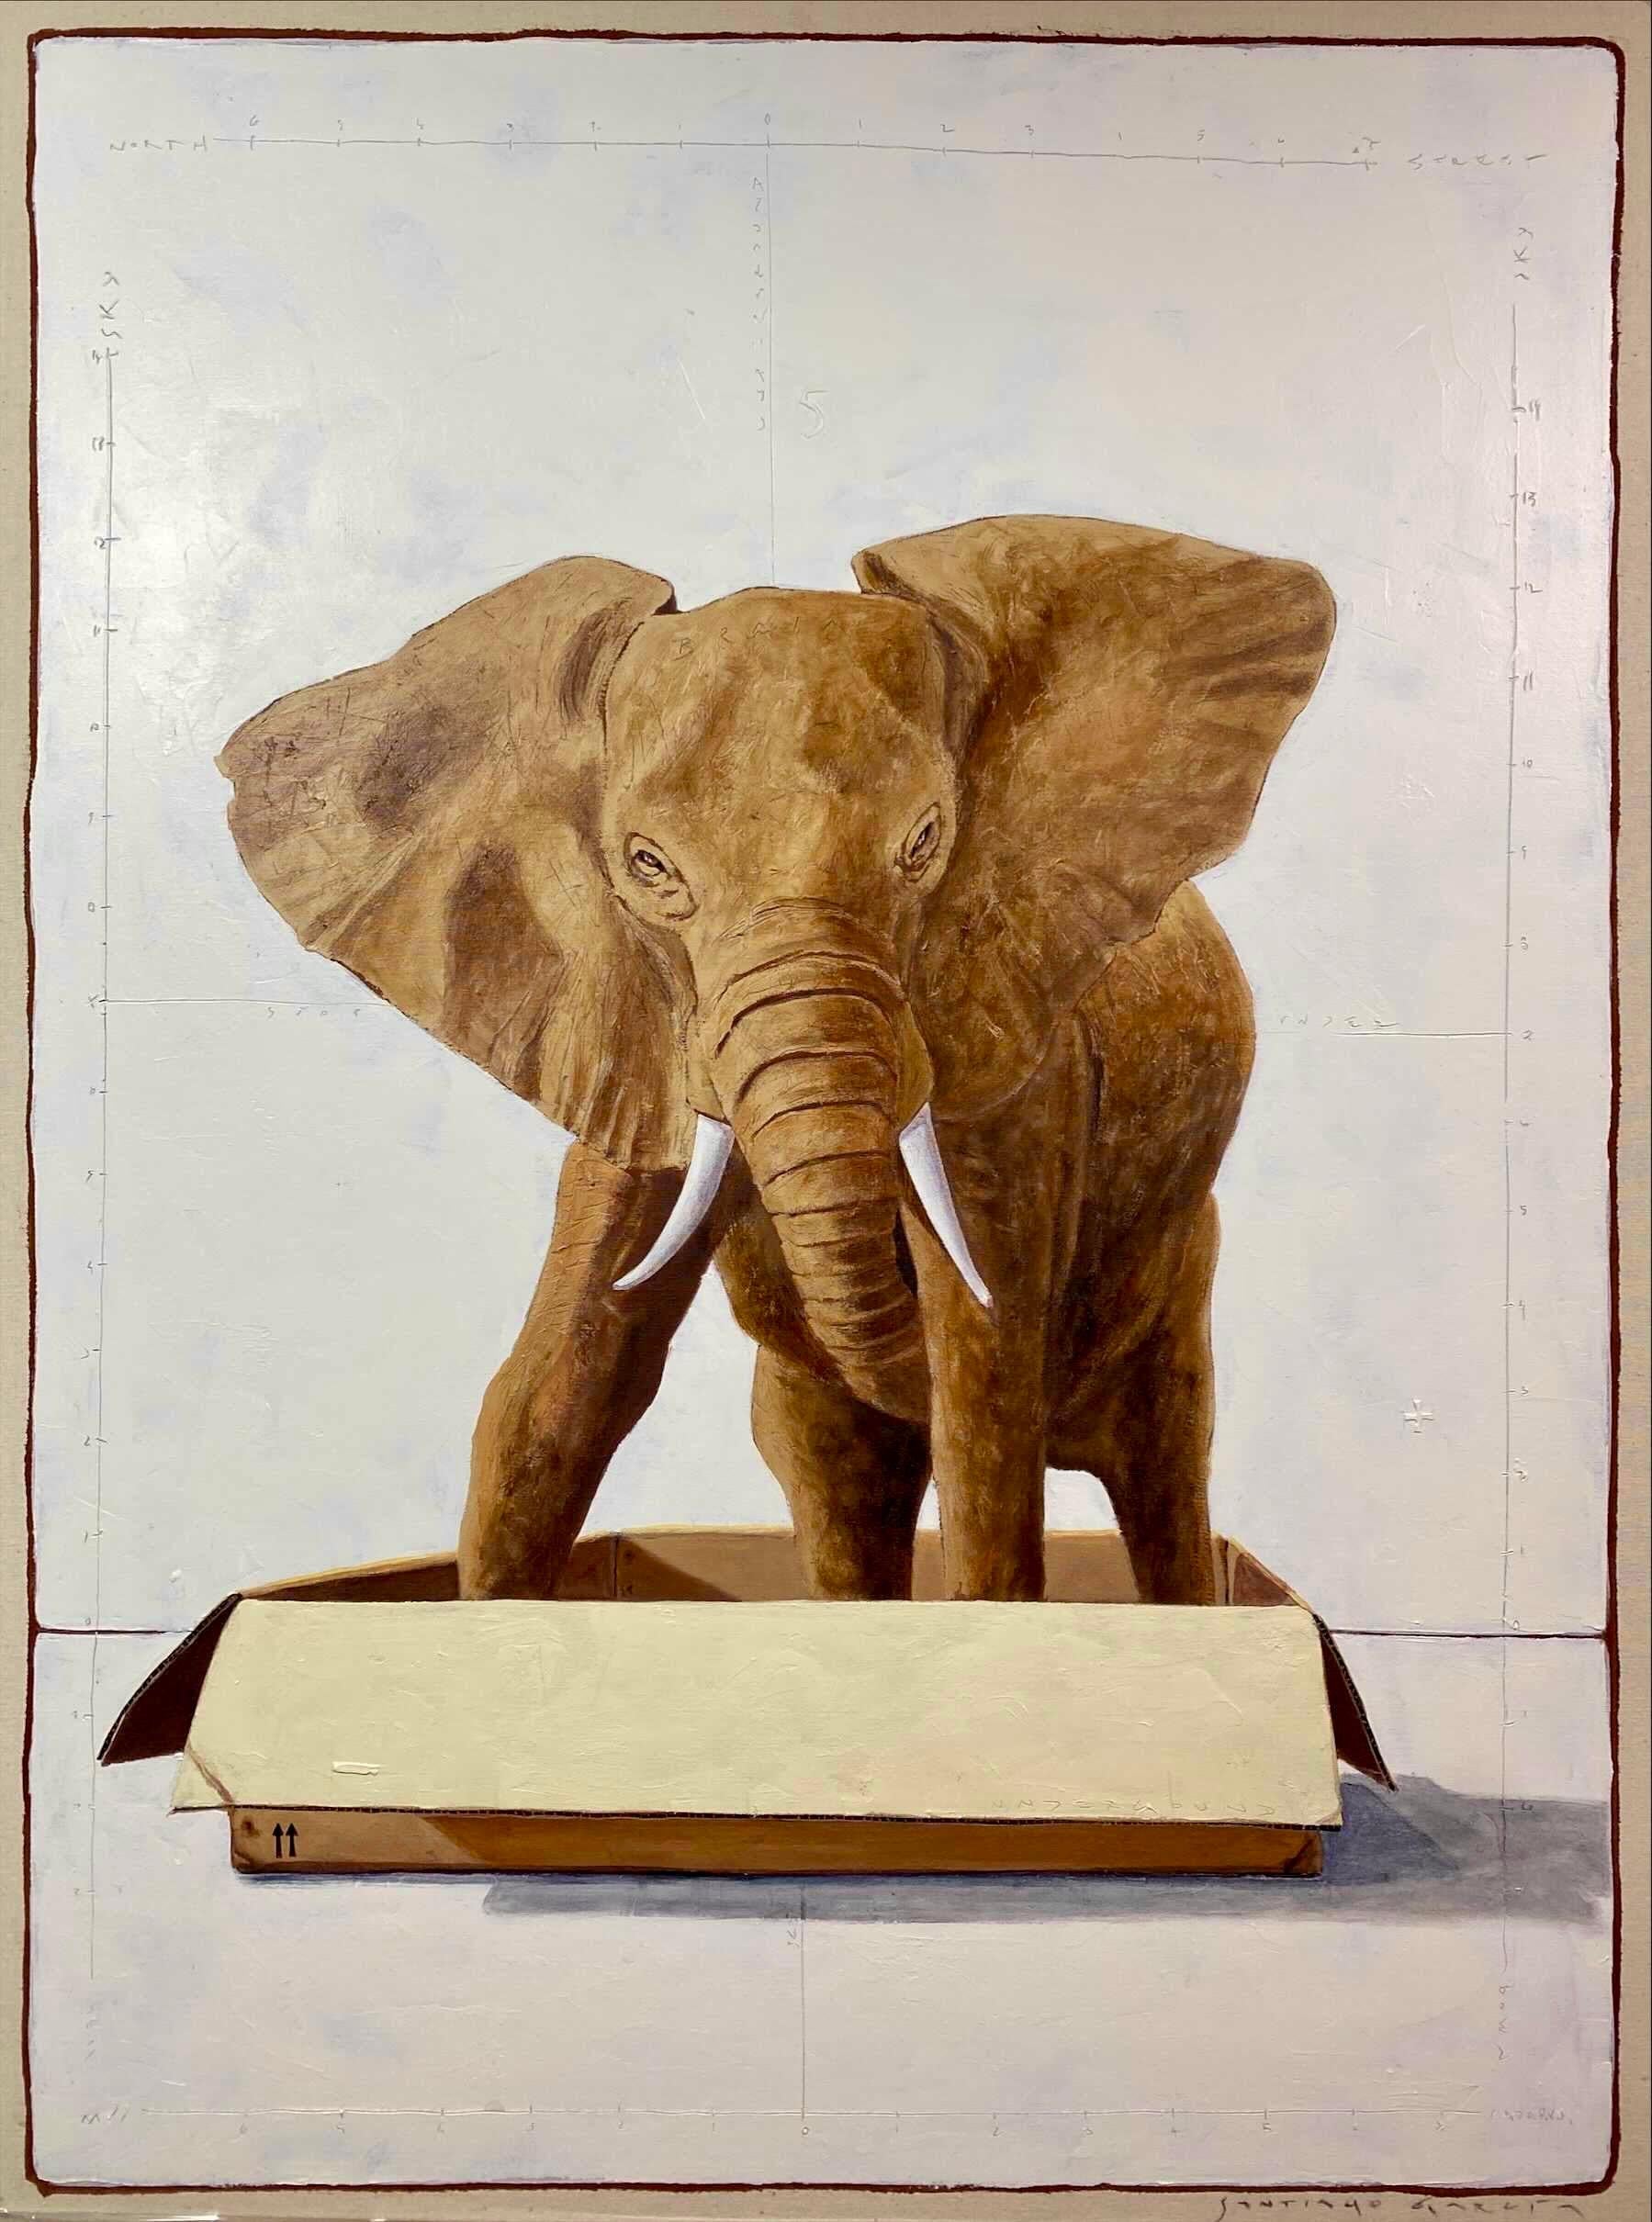 Santiago Garcia Animal Painting - "Andante #917" painting of a small elephant standing in a cardboard box